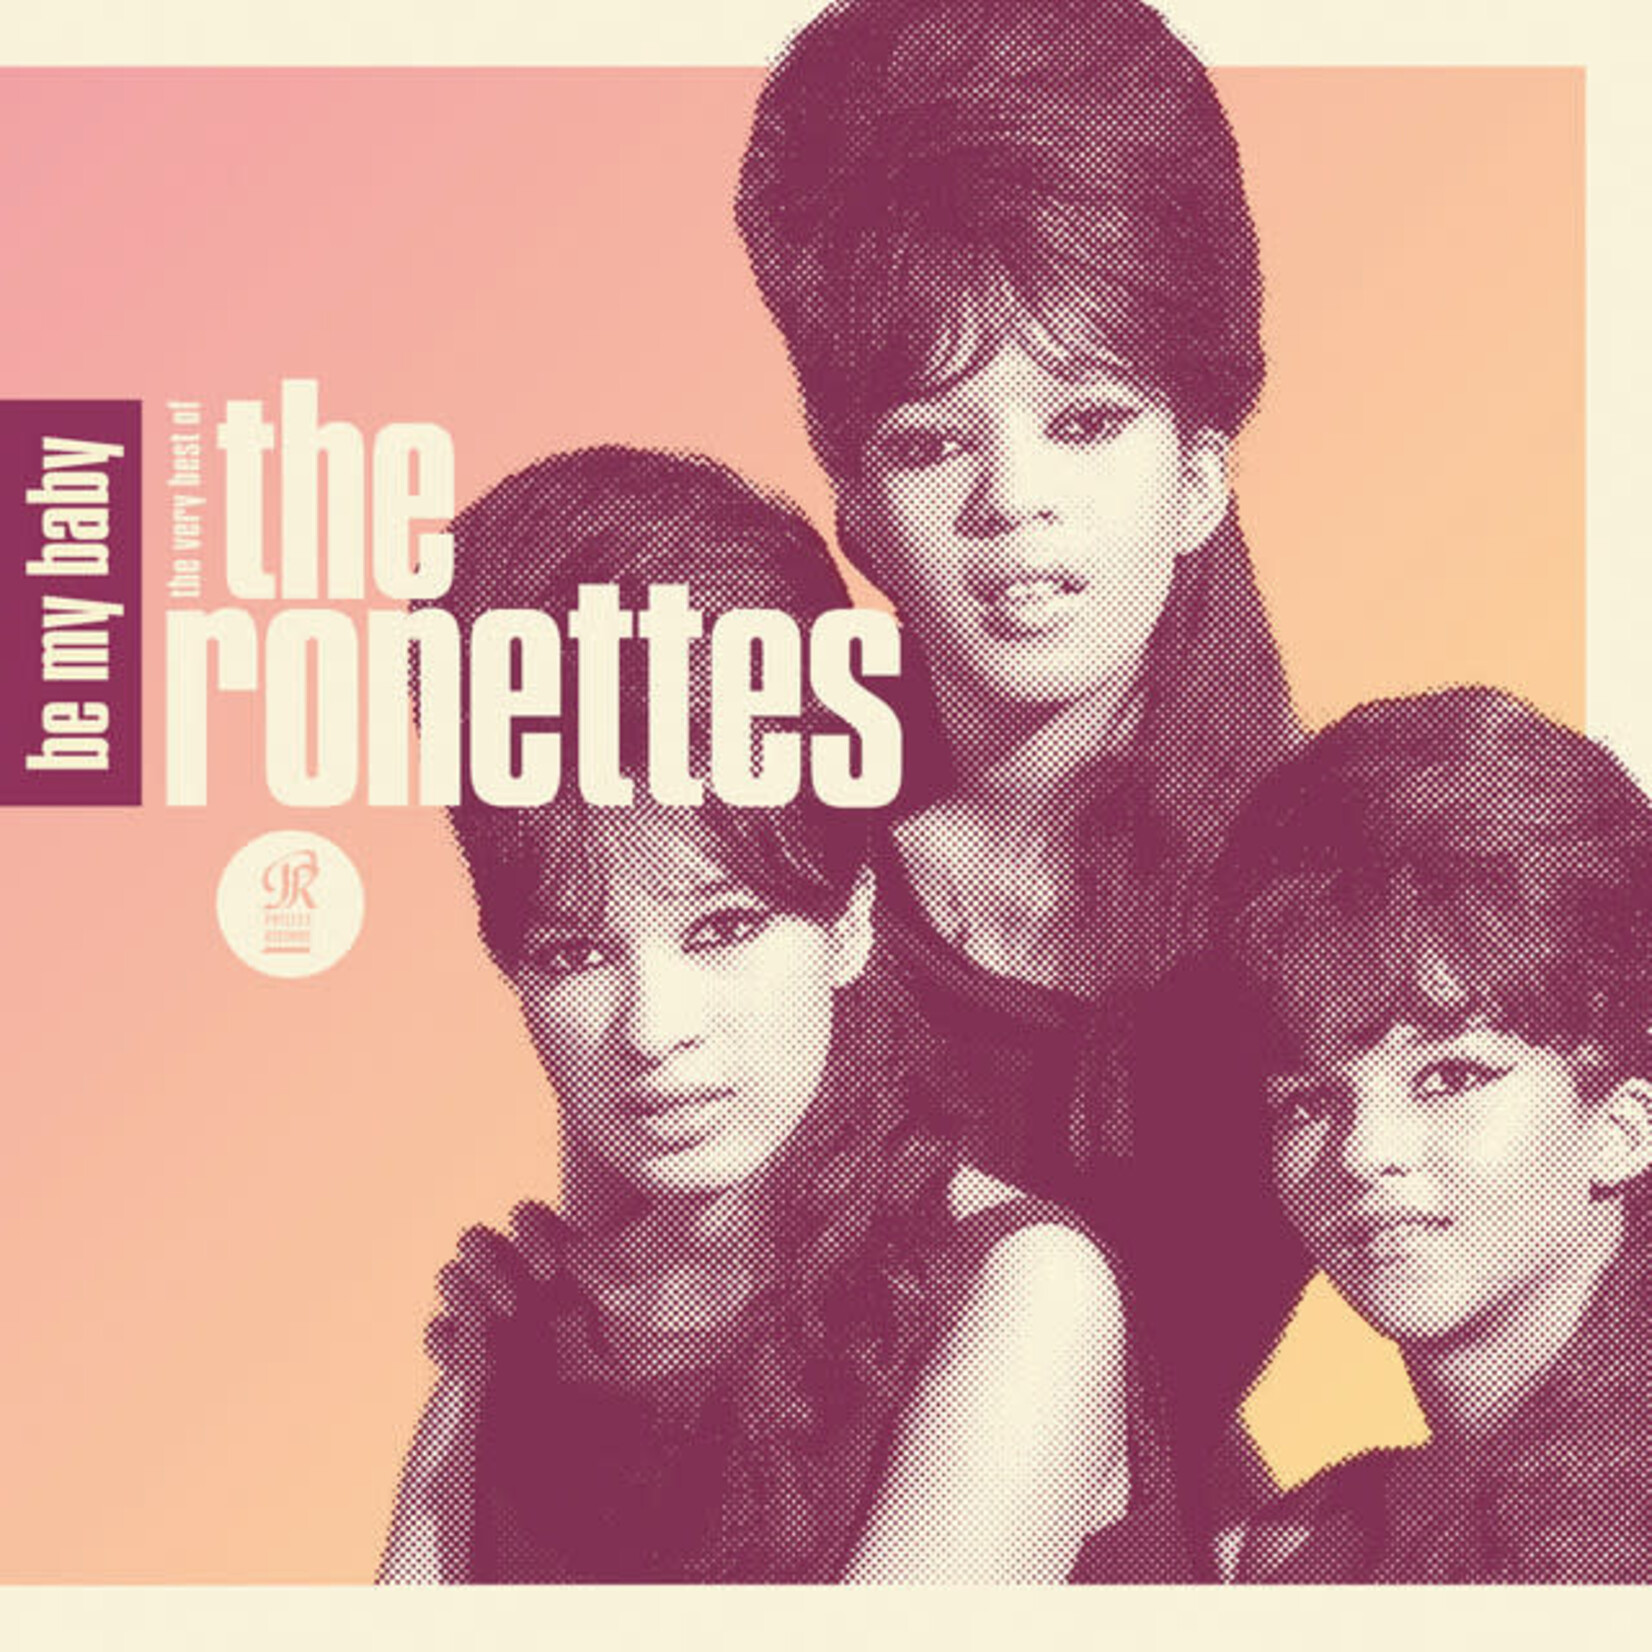 Ronettes - Be My Baby: The Very Best Of The Ronettes [CD]